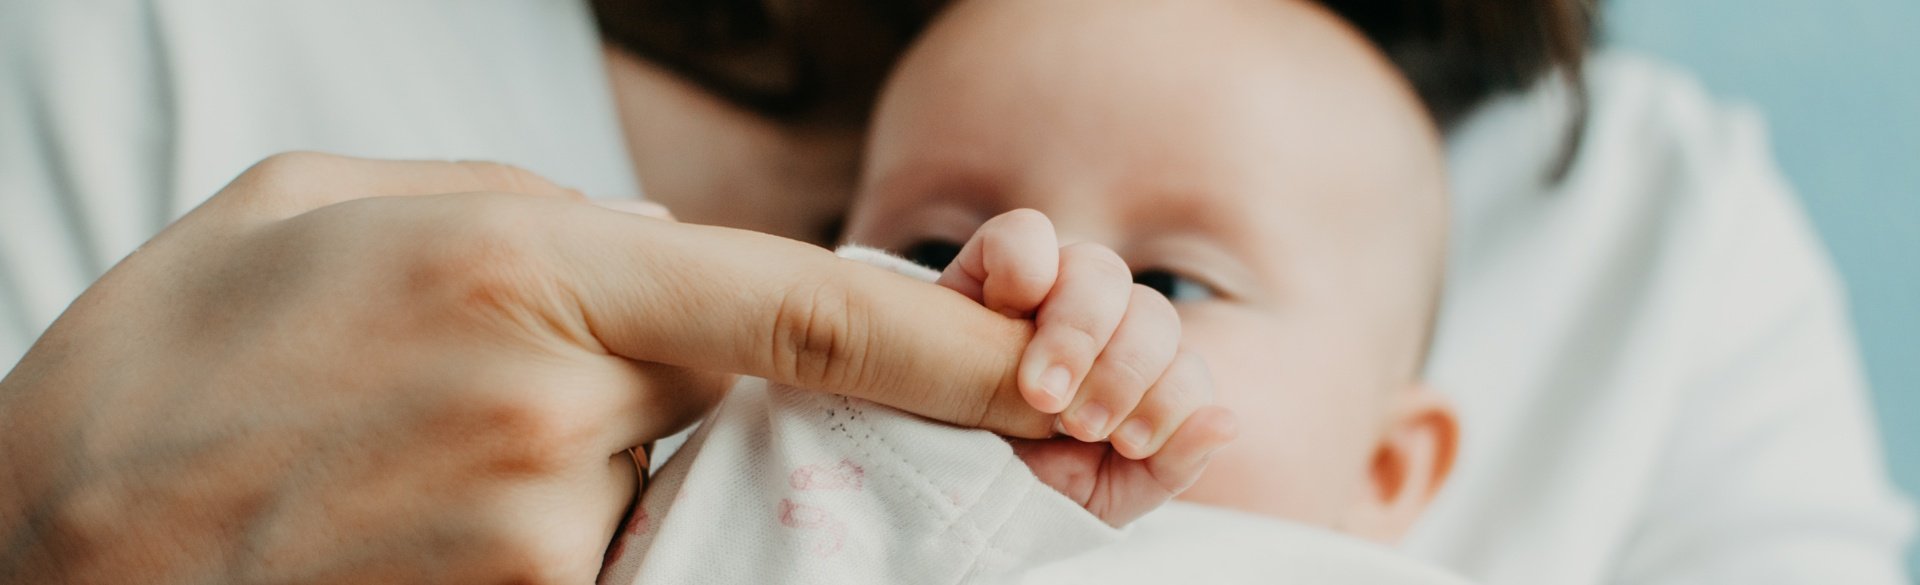 Baby holding a finger